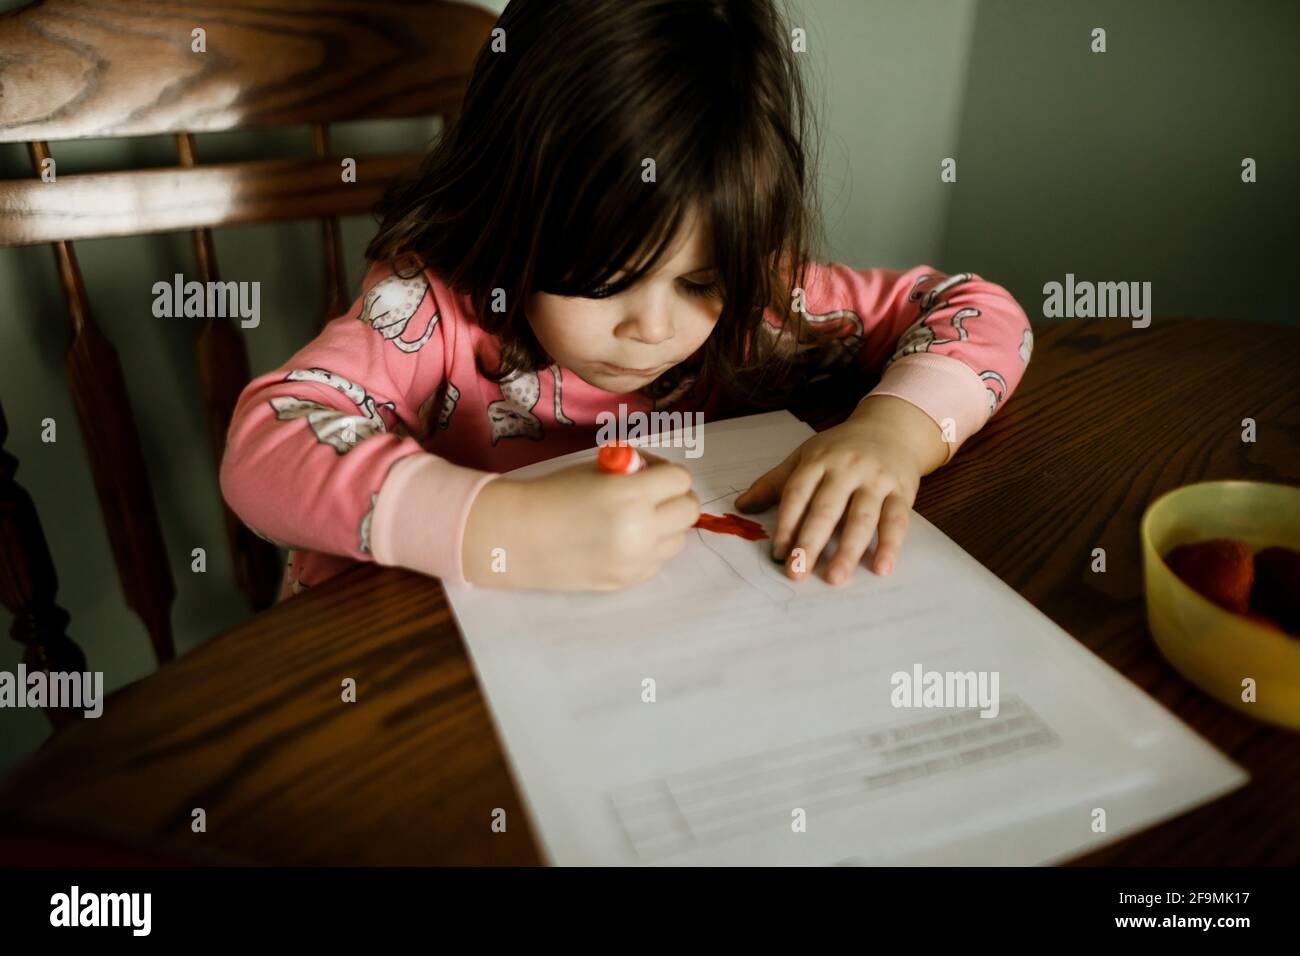 Young girl wearing pajamas coloring with a red marker at kitchen table Stock Photo